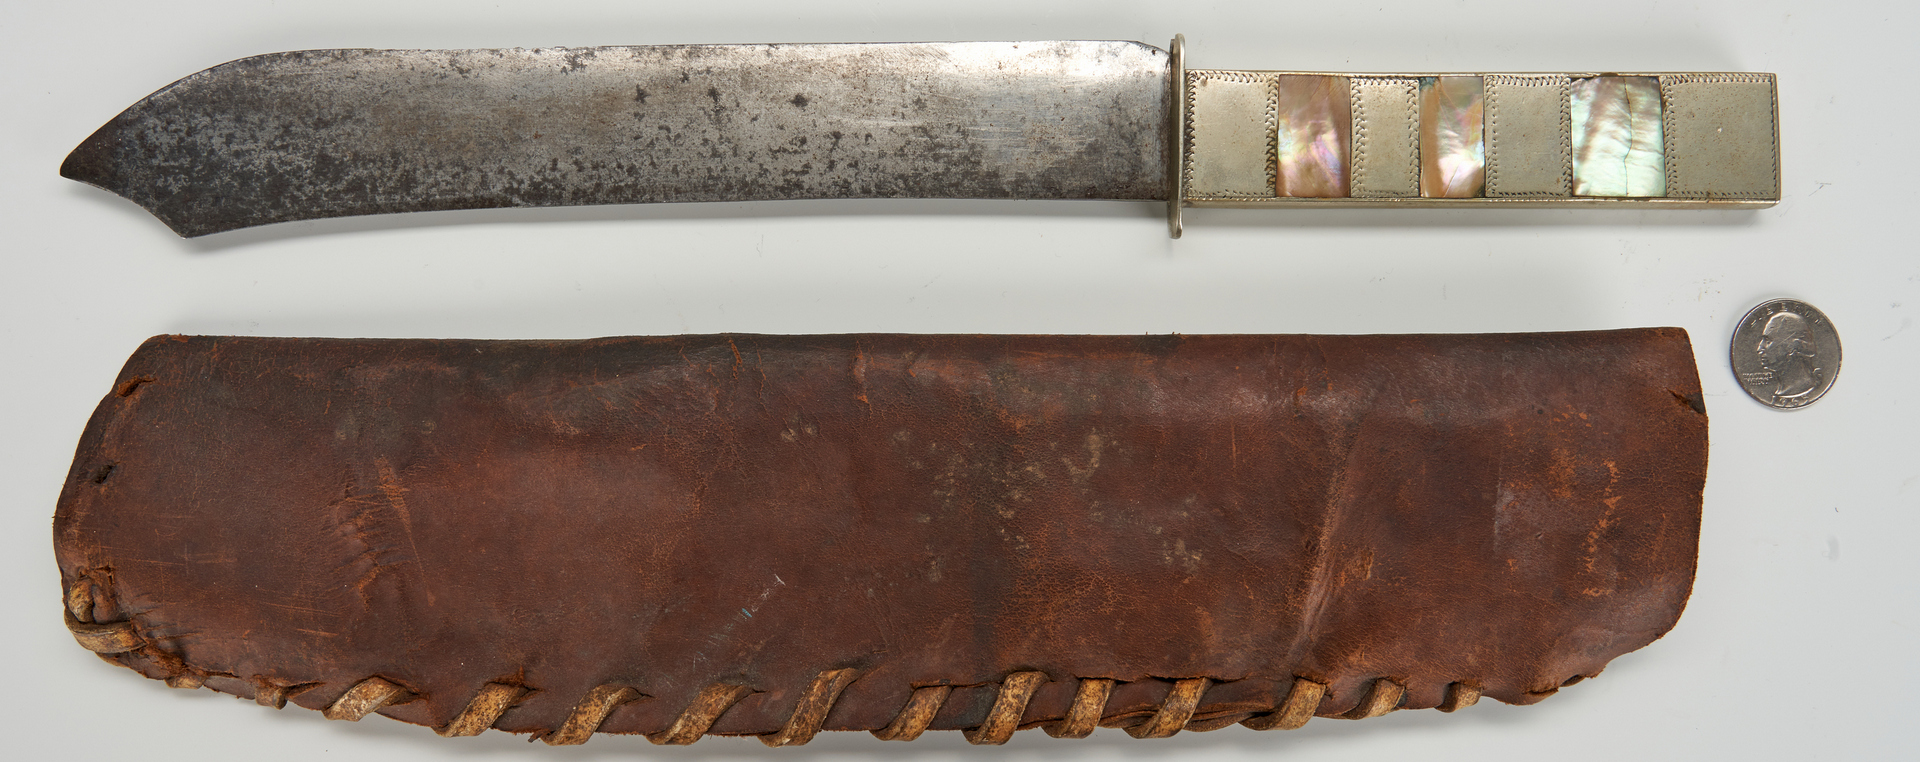 Lot 612: Abalone Handle Knife with Leather Sheath, with provenance